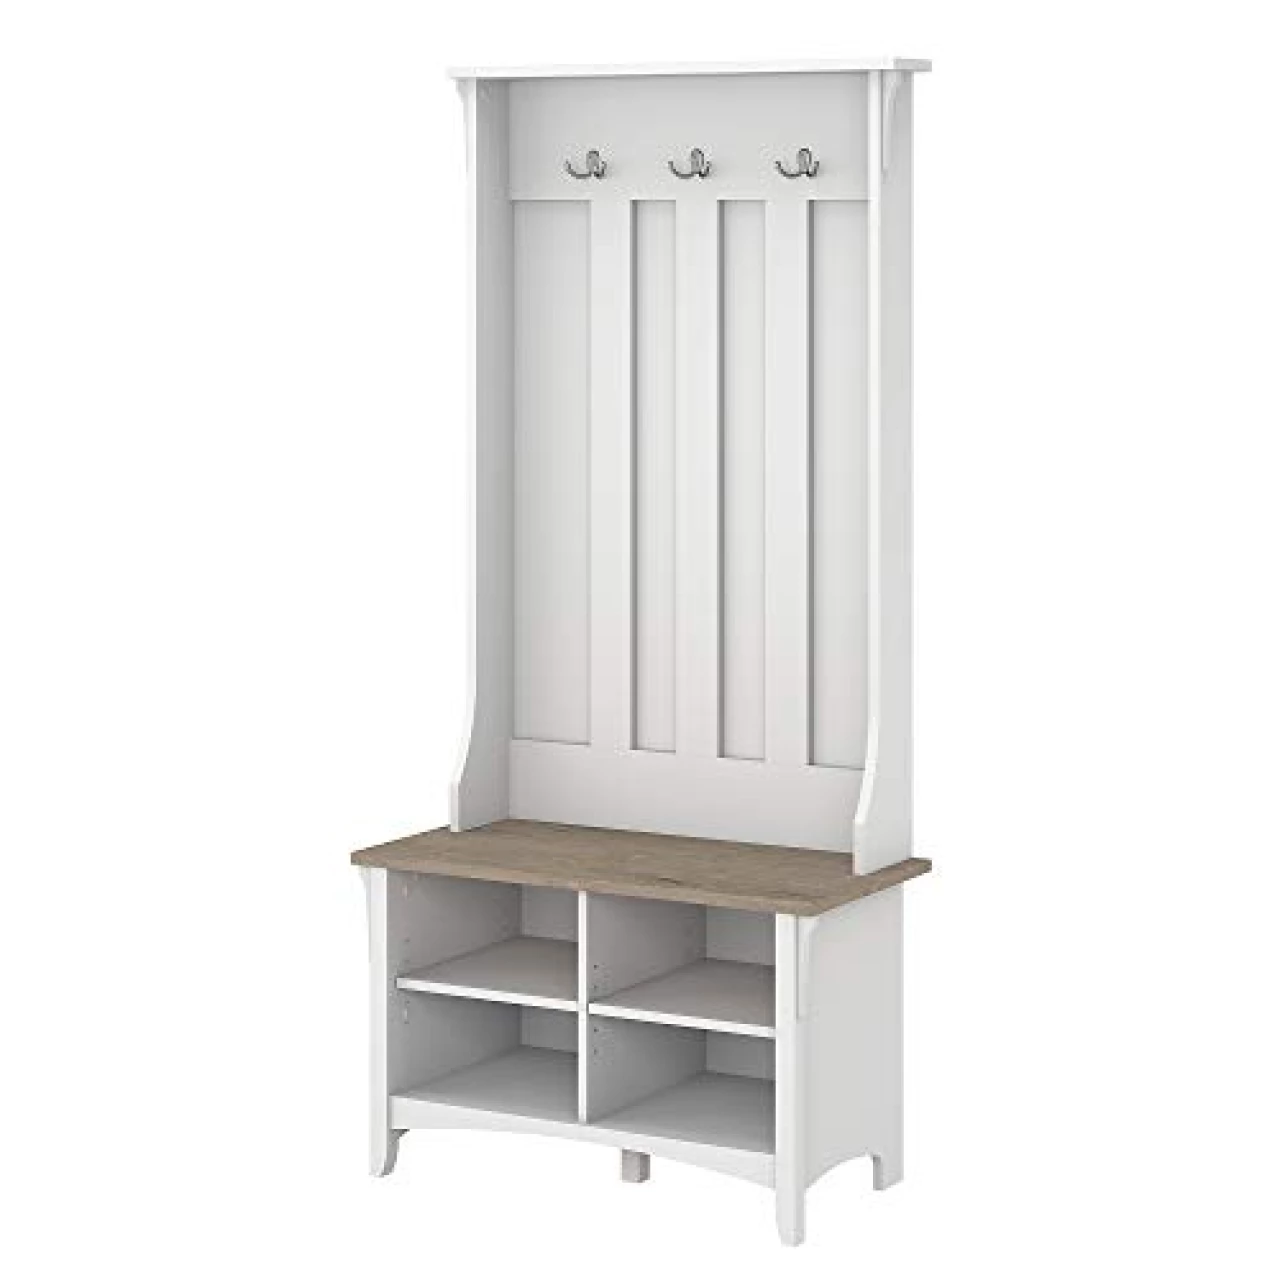 Bush Furniture Salinas Hall Tree Entryway Small Bench with Adjustable Shelves | Coat Rack with 3 Hanging Hooks and Shoe Storage, Pure White and Shiplap Gray